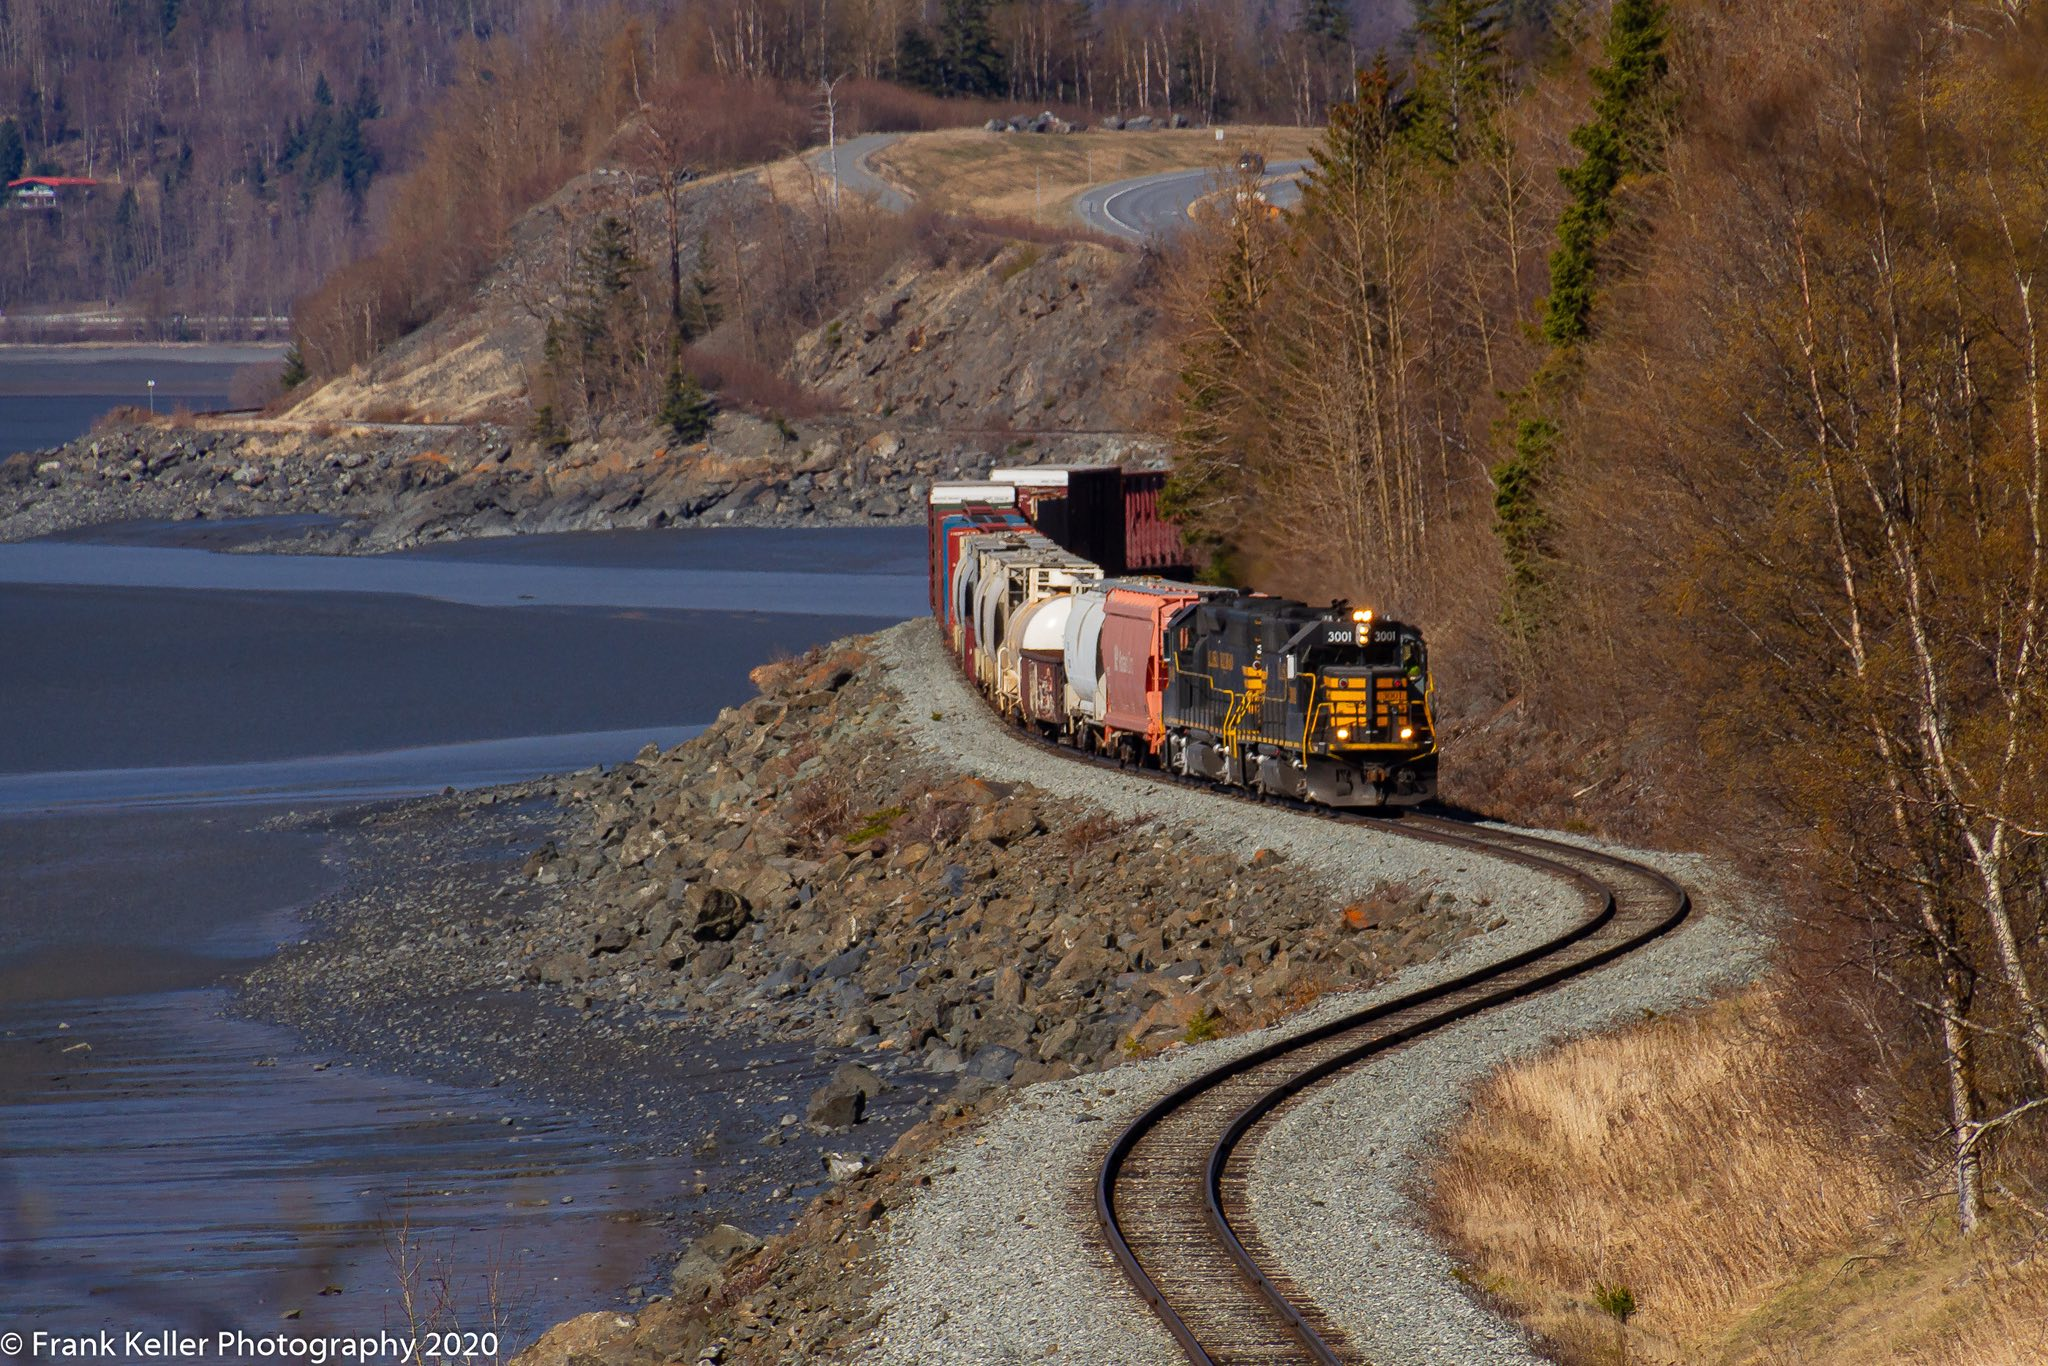 Contours: It would appear that had they added some fill the tracks could have been much straighter at this location. I am sure however that there was much more to it than my simple statement. In any event it makes for an interesting perspective as the track really follow the contours of Turnagain Arm. Taken on April 8, 2016